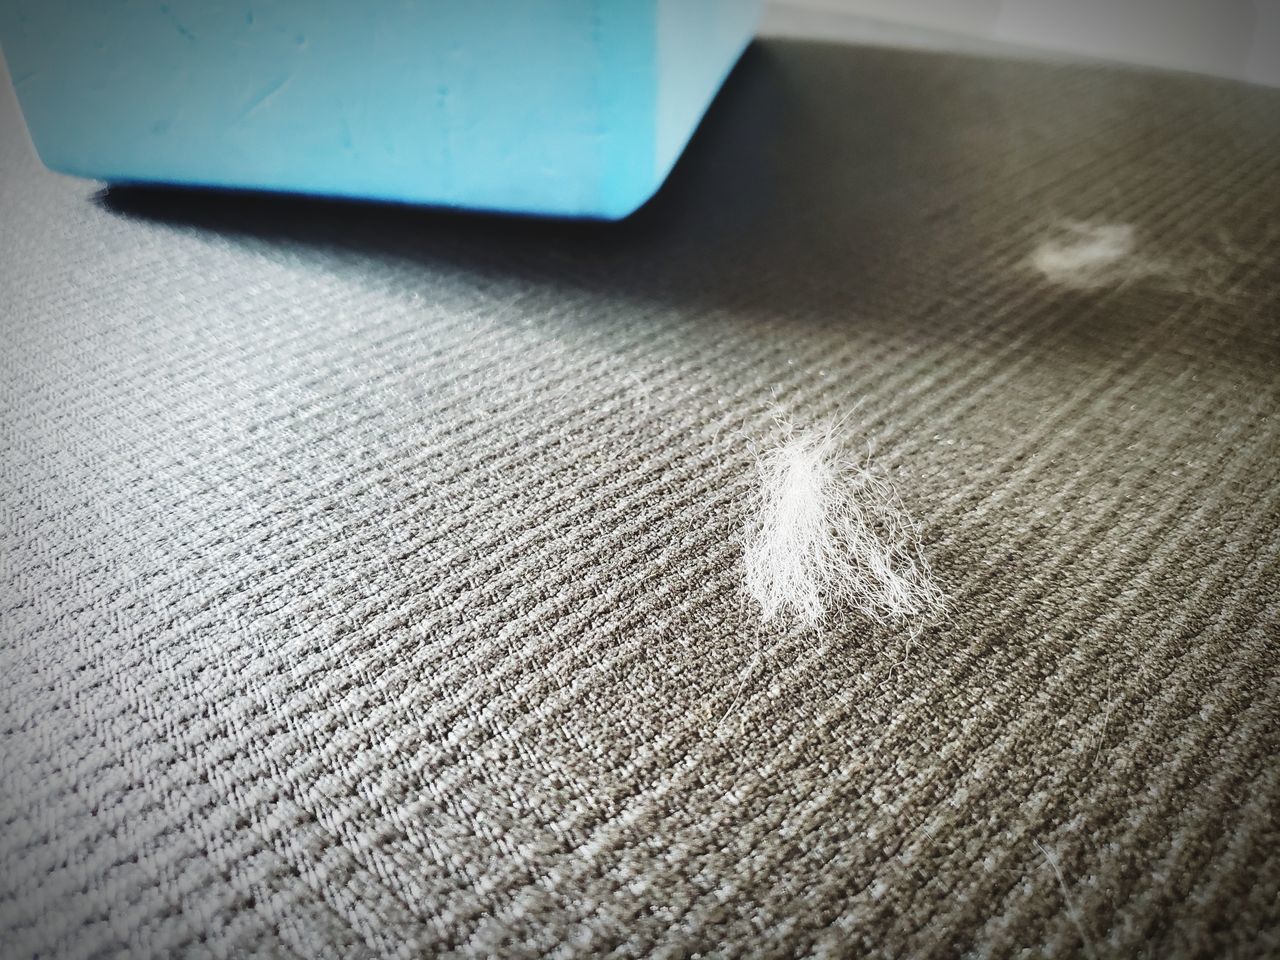 CLOSE-UP OF FEATHERS ON TABLE